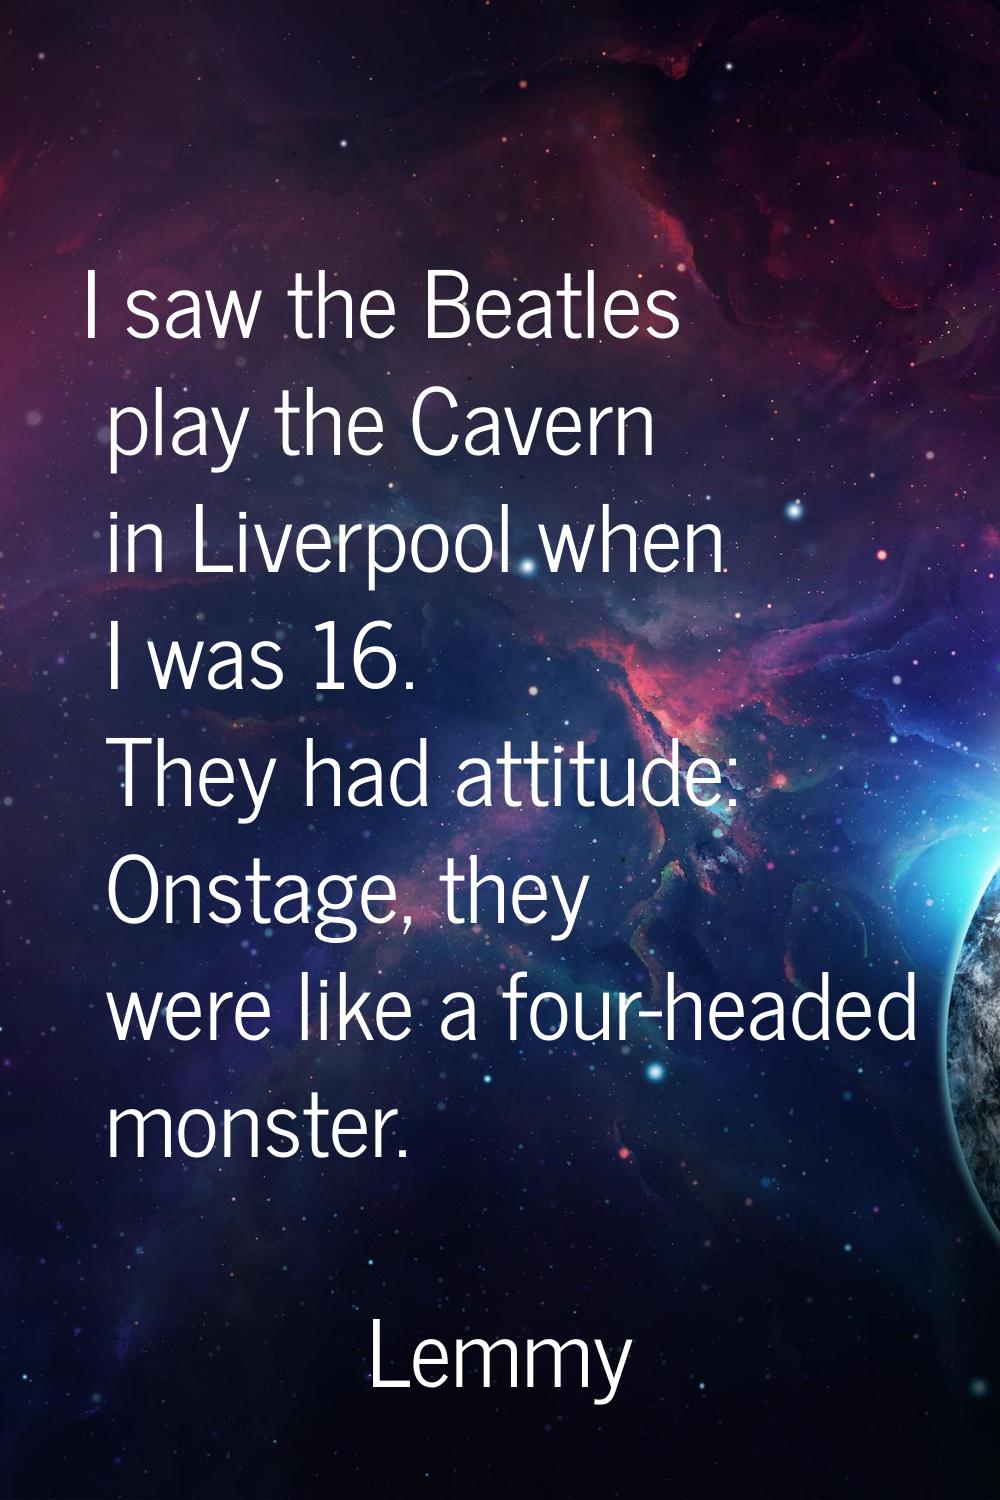 I saw the Beatles play the Cavern in Liverpool when I was 16. They had attitude: Onstage, they were